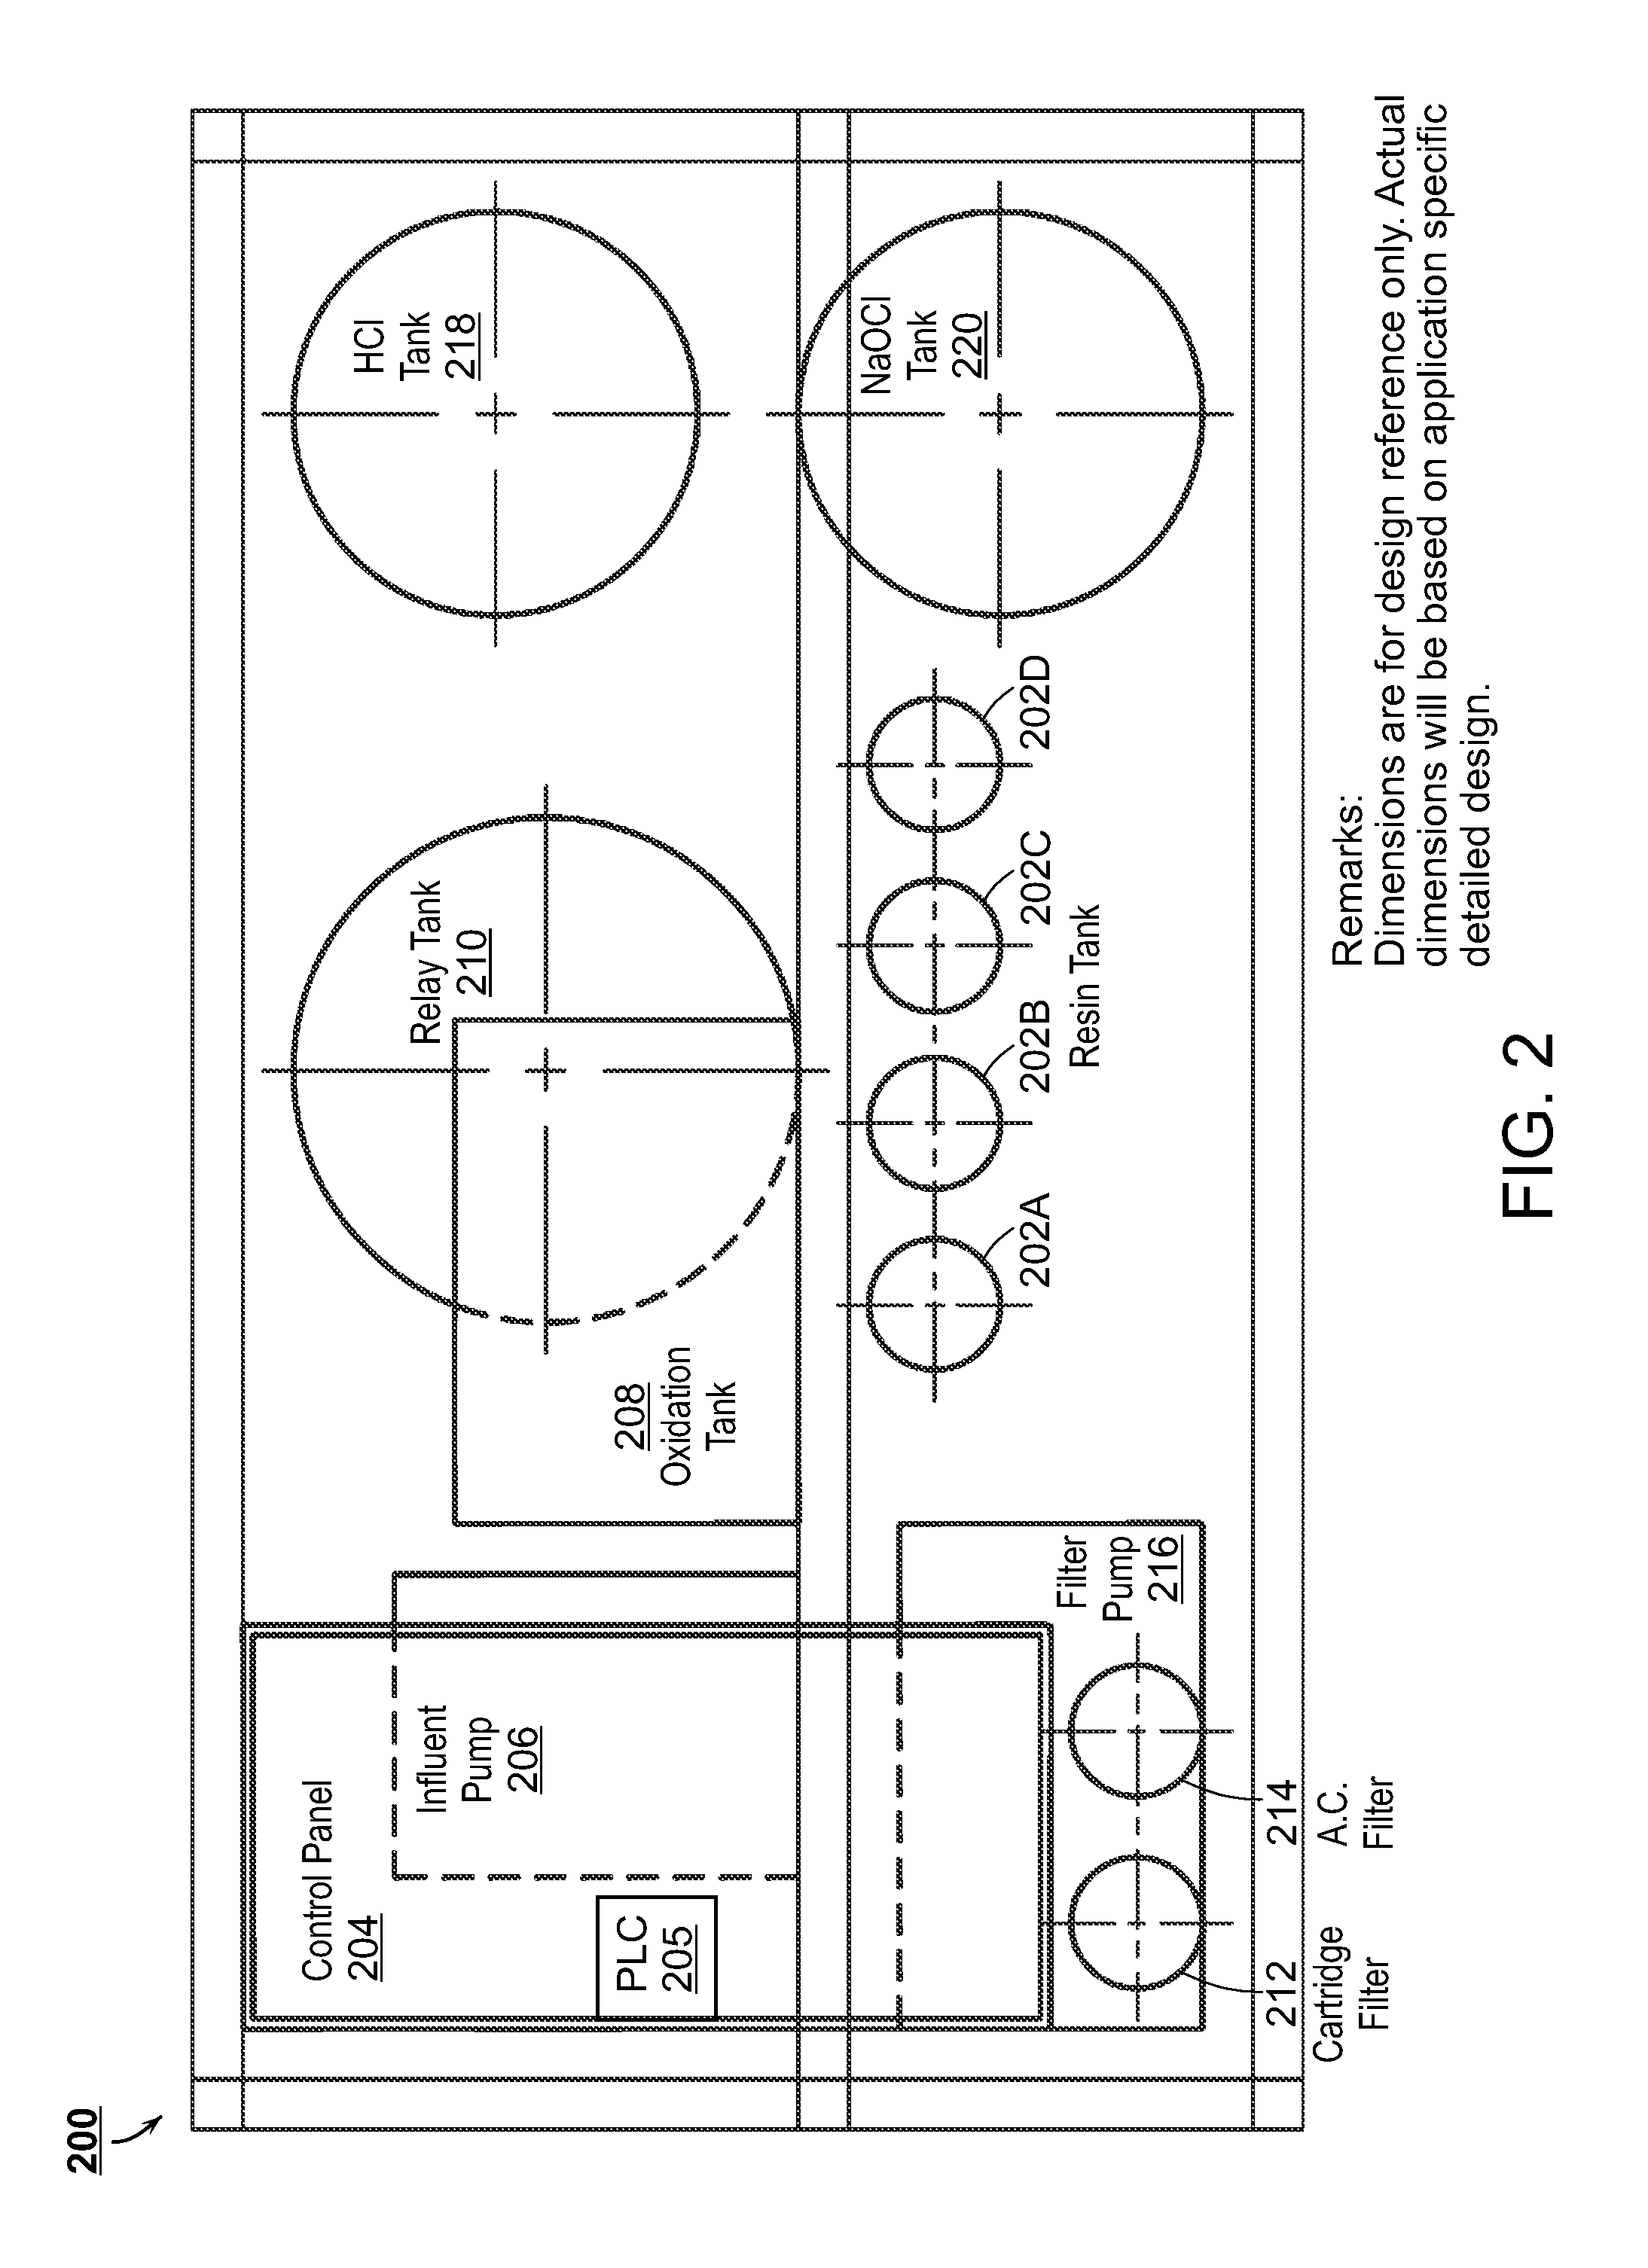 System and method for wastewater treatment